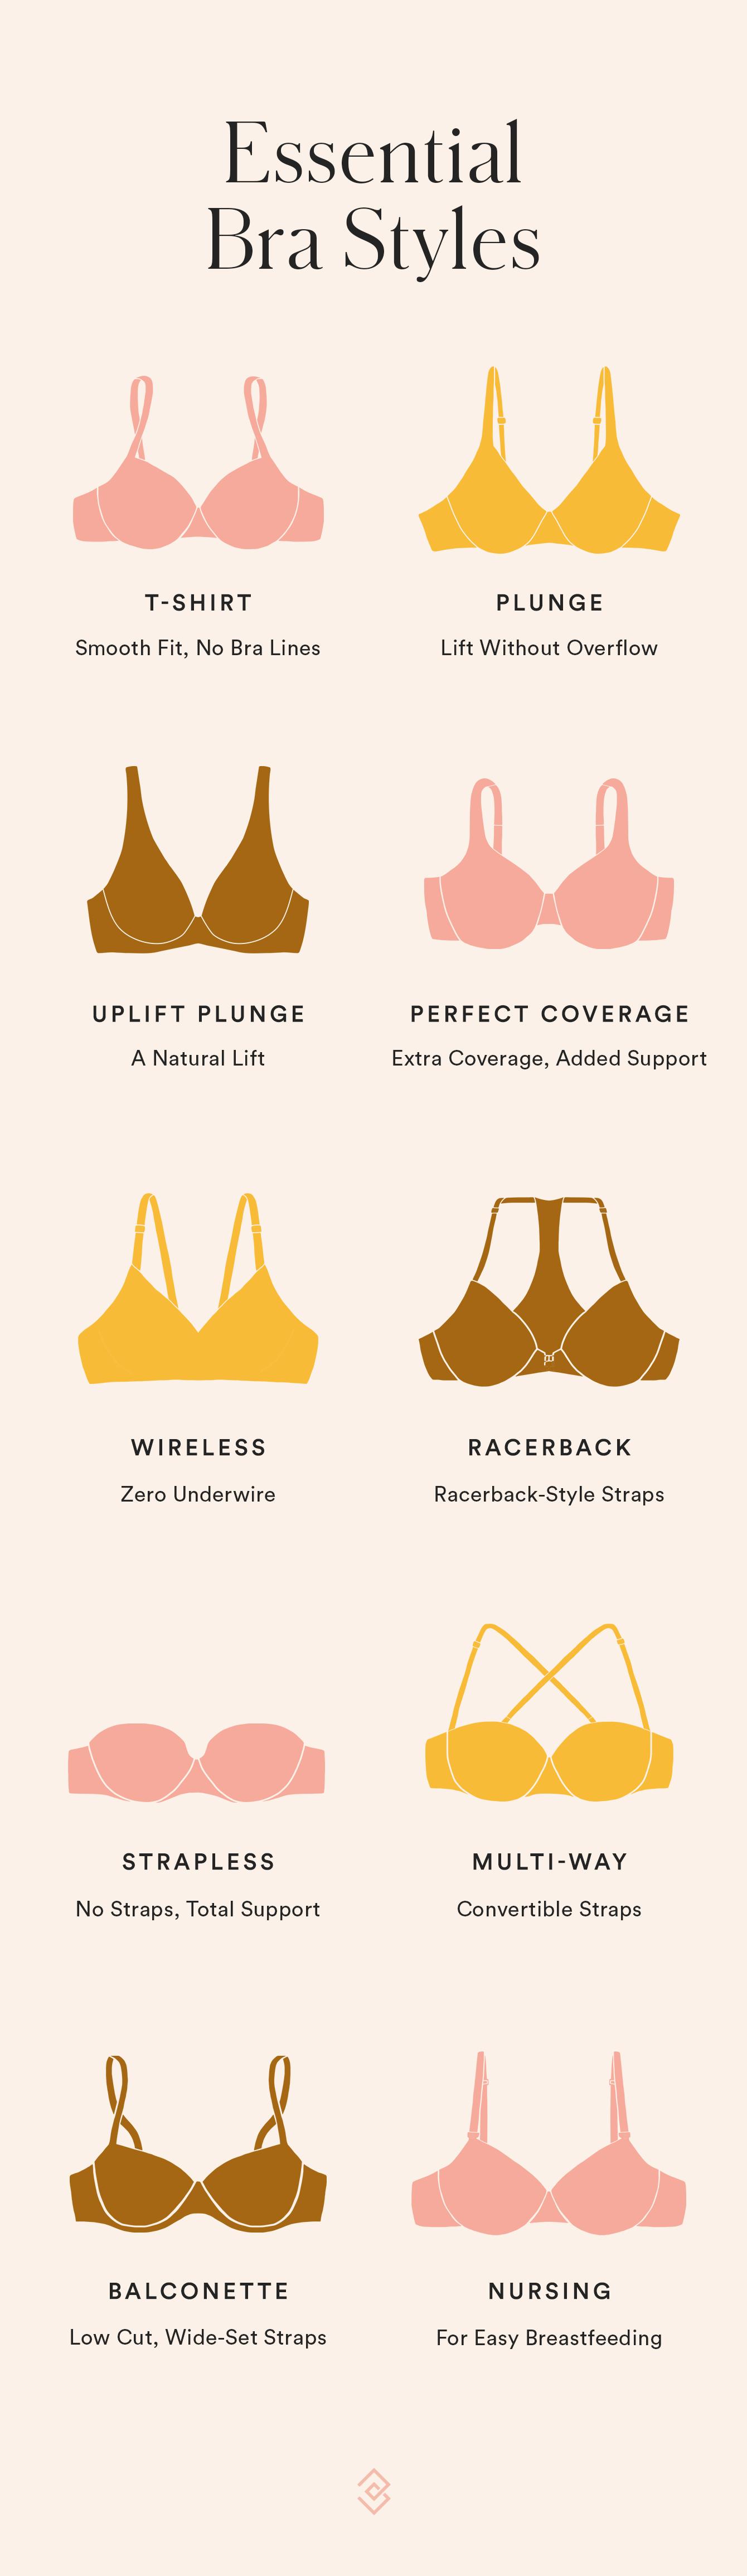 Your BRAS don't FIT your BREAST Shape! Choose The BEST Bra